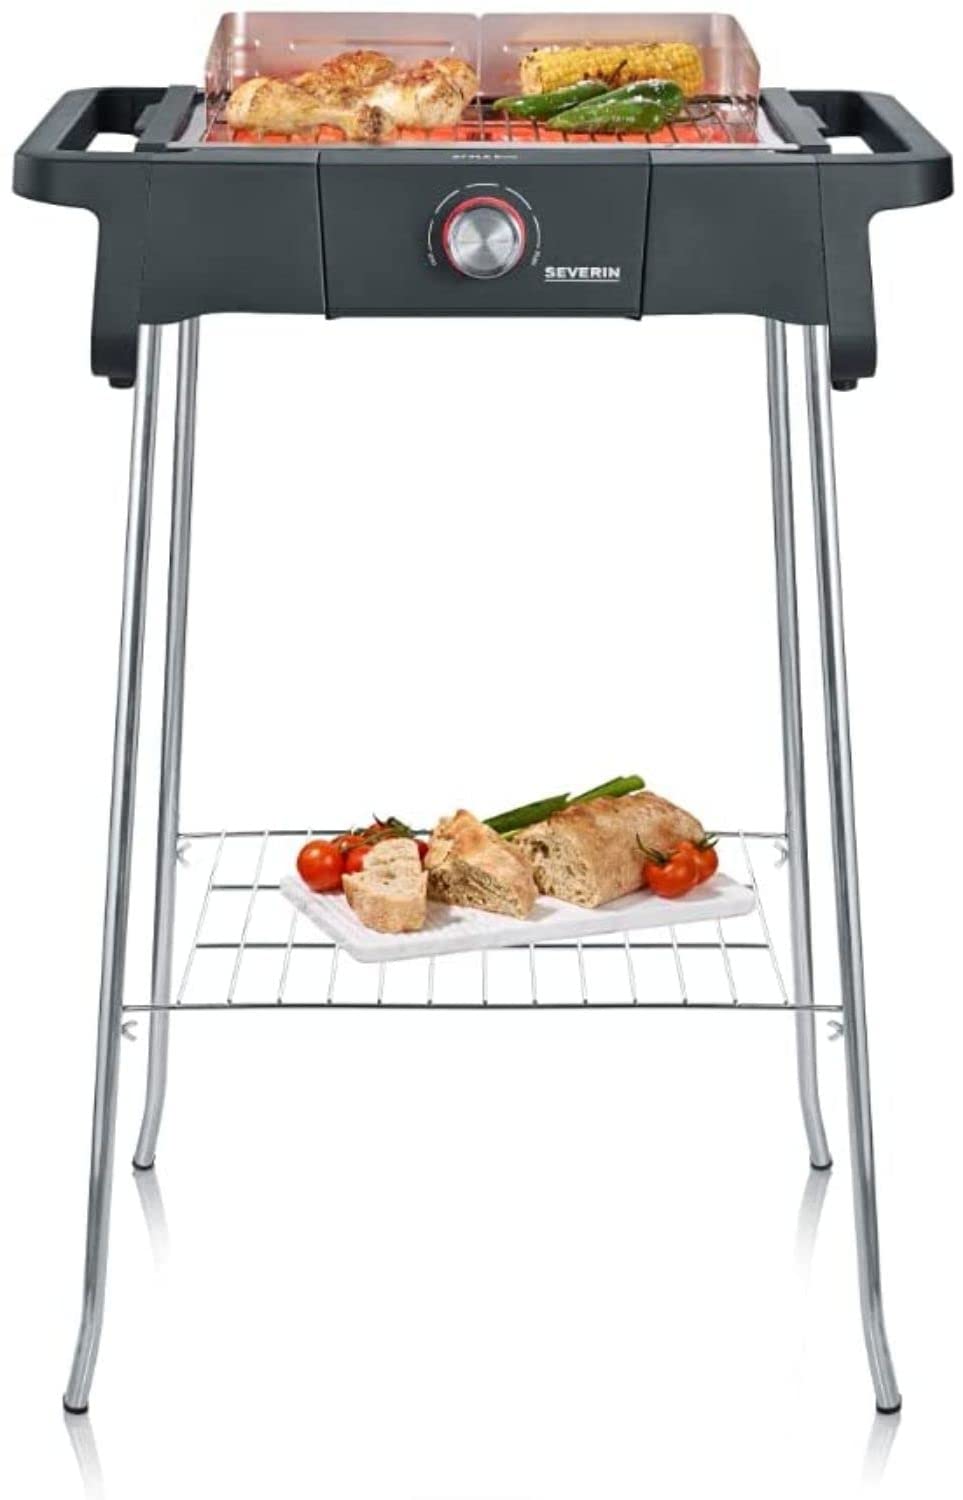 SEVERIN Style Evo PG 8124 Electric Grill with Stand Frame and Storage Grill with Quick Grill Start up to 350 °C, Balcony Grill with Optimal Heat Distribution Black